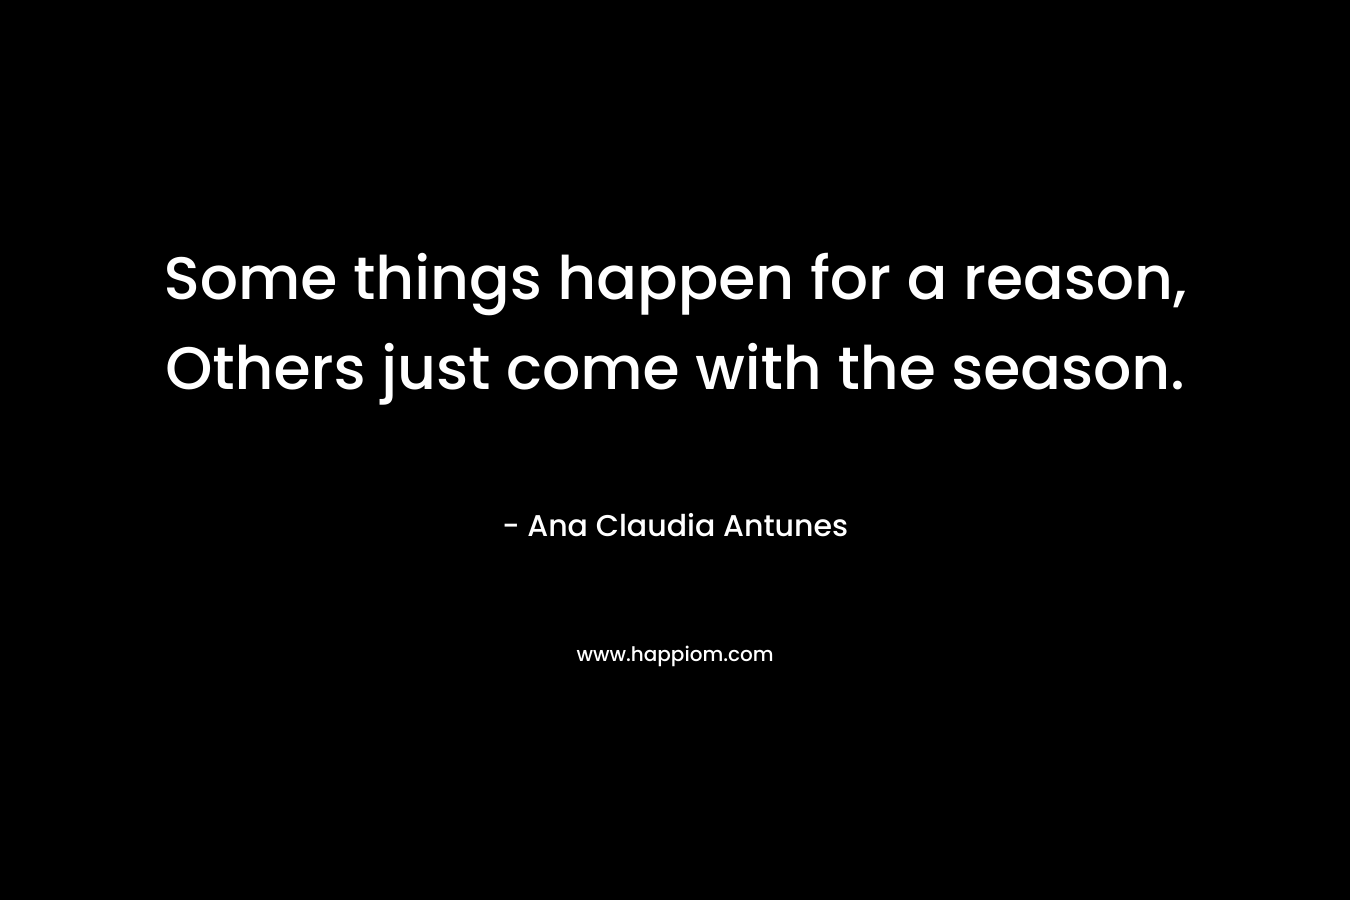 Some things happen for a reason, Others just come with the season.